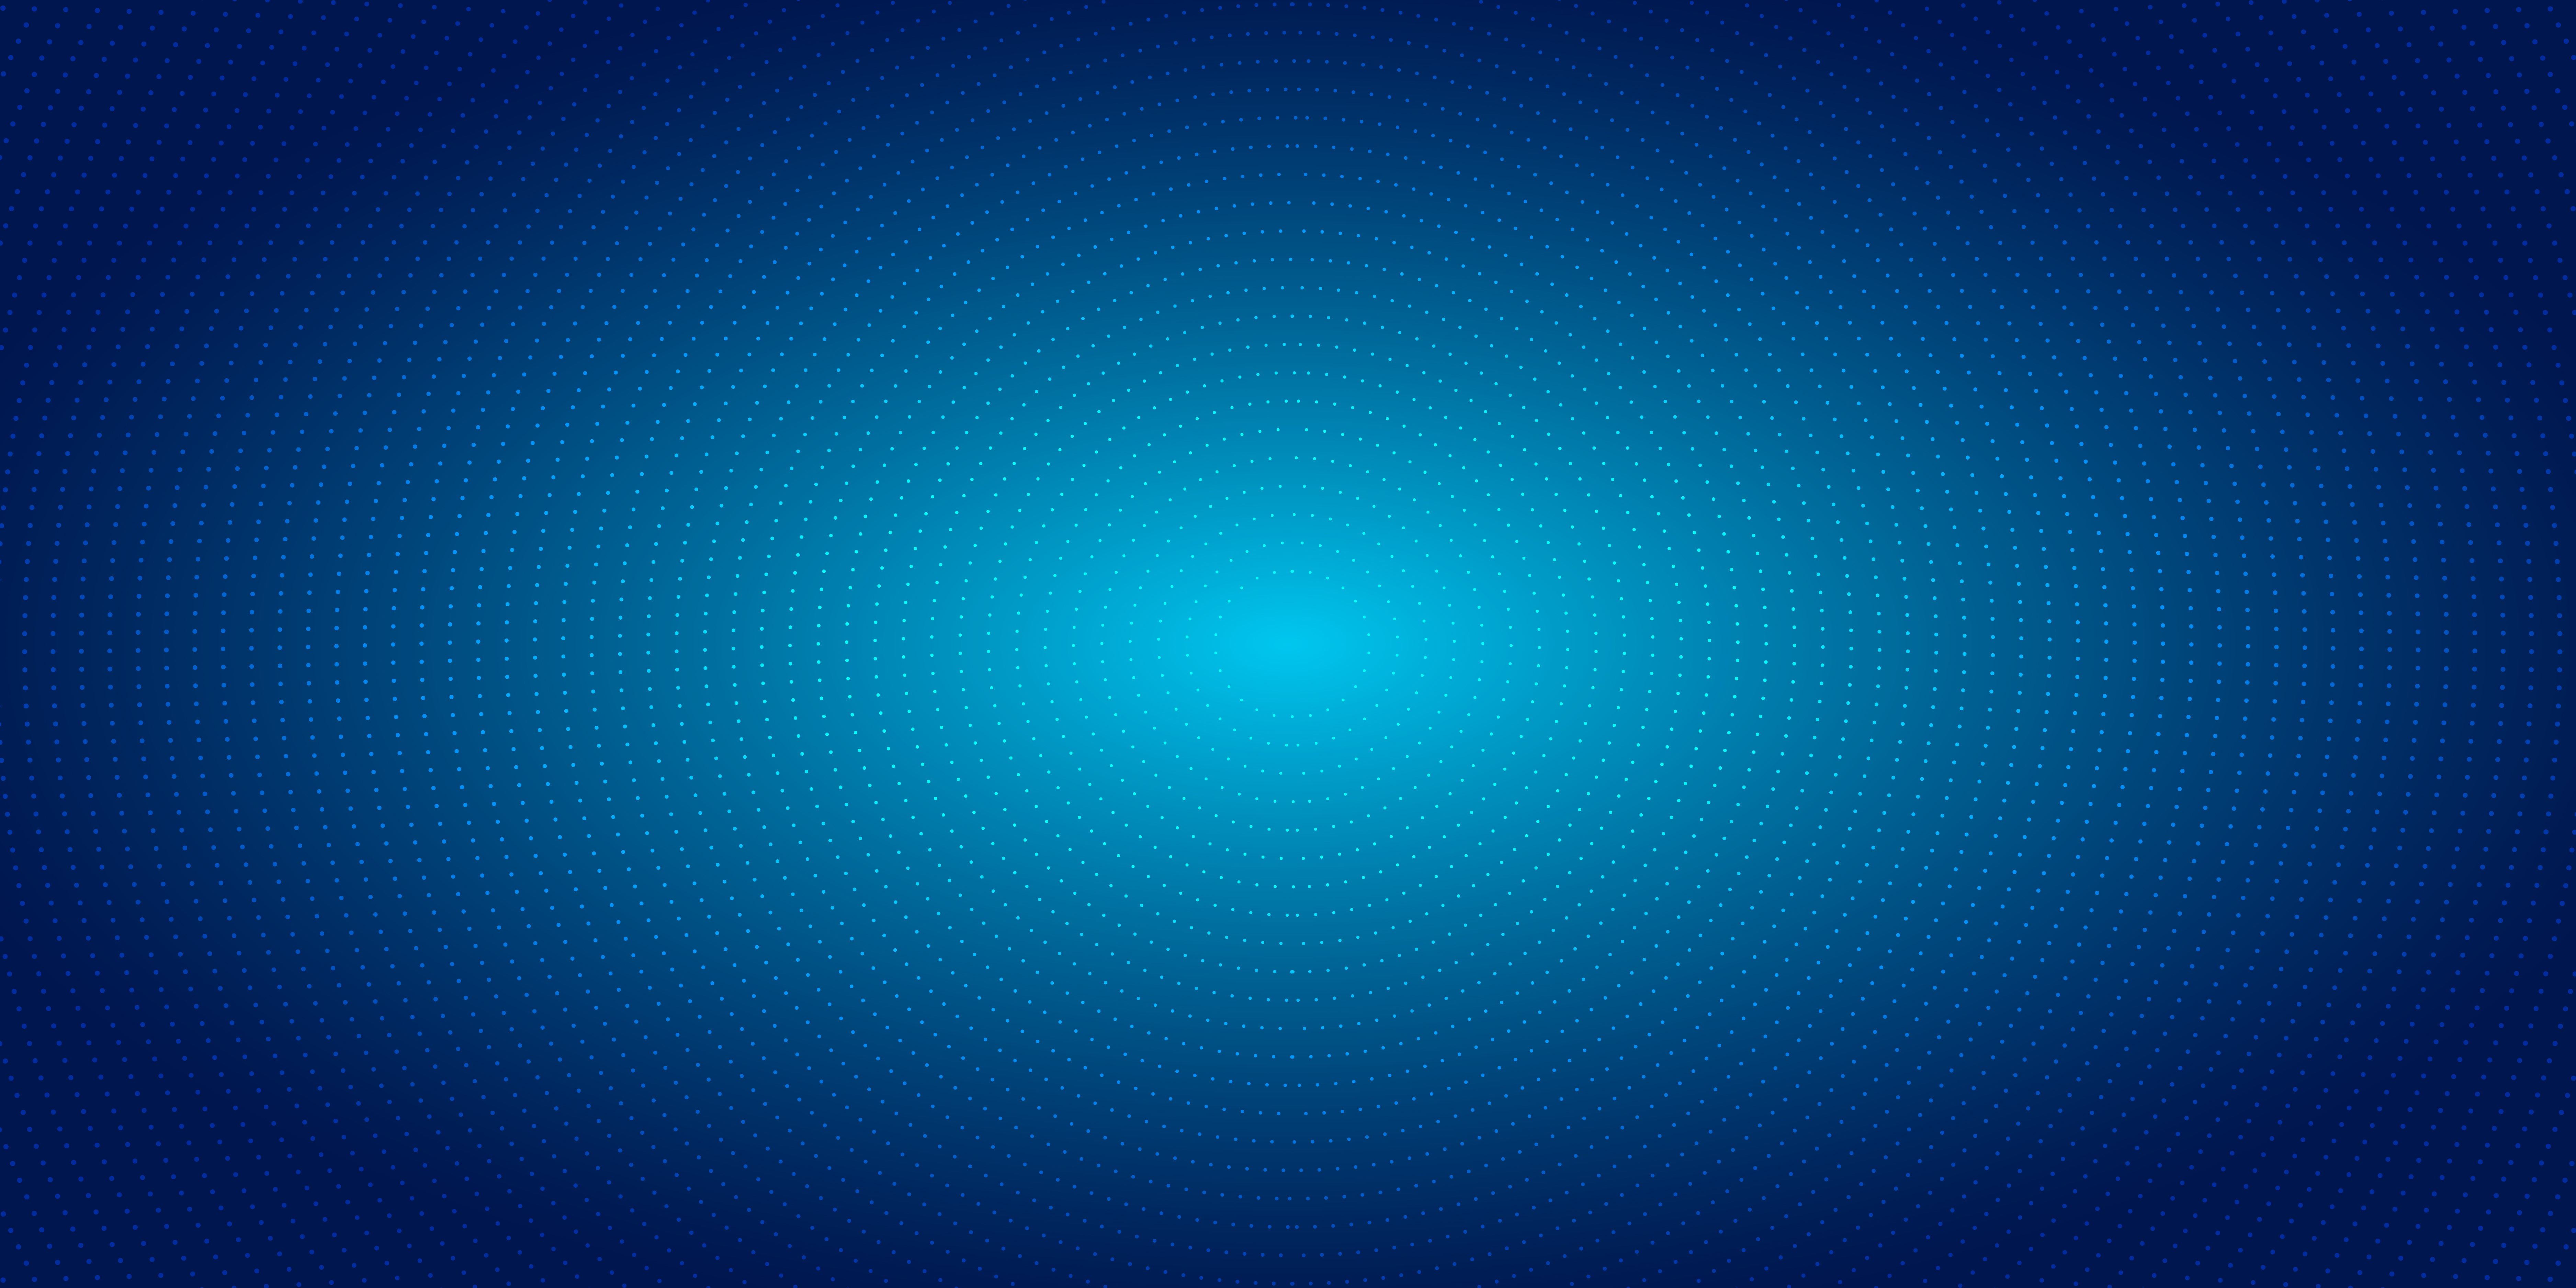 Abstract Radial Dots Pattern Halftone On Blue Gradient Background